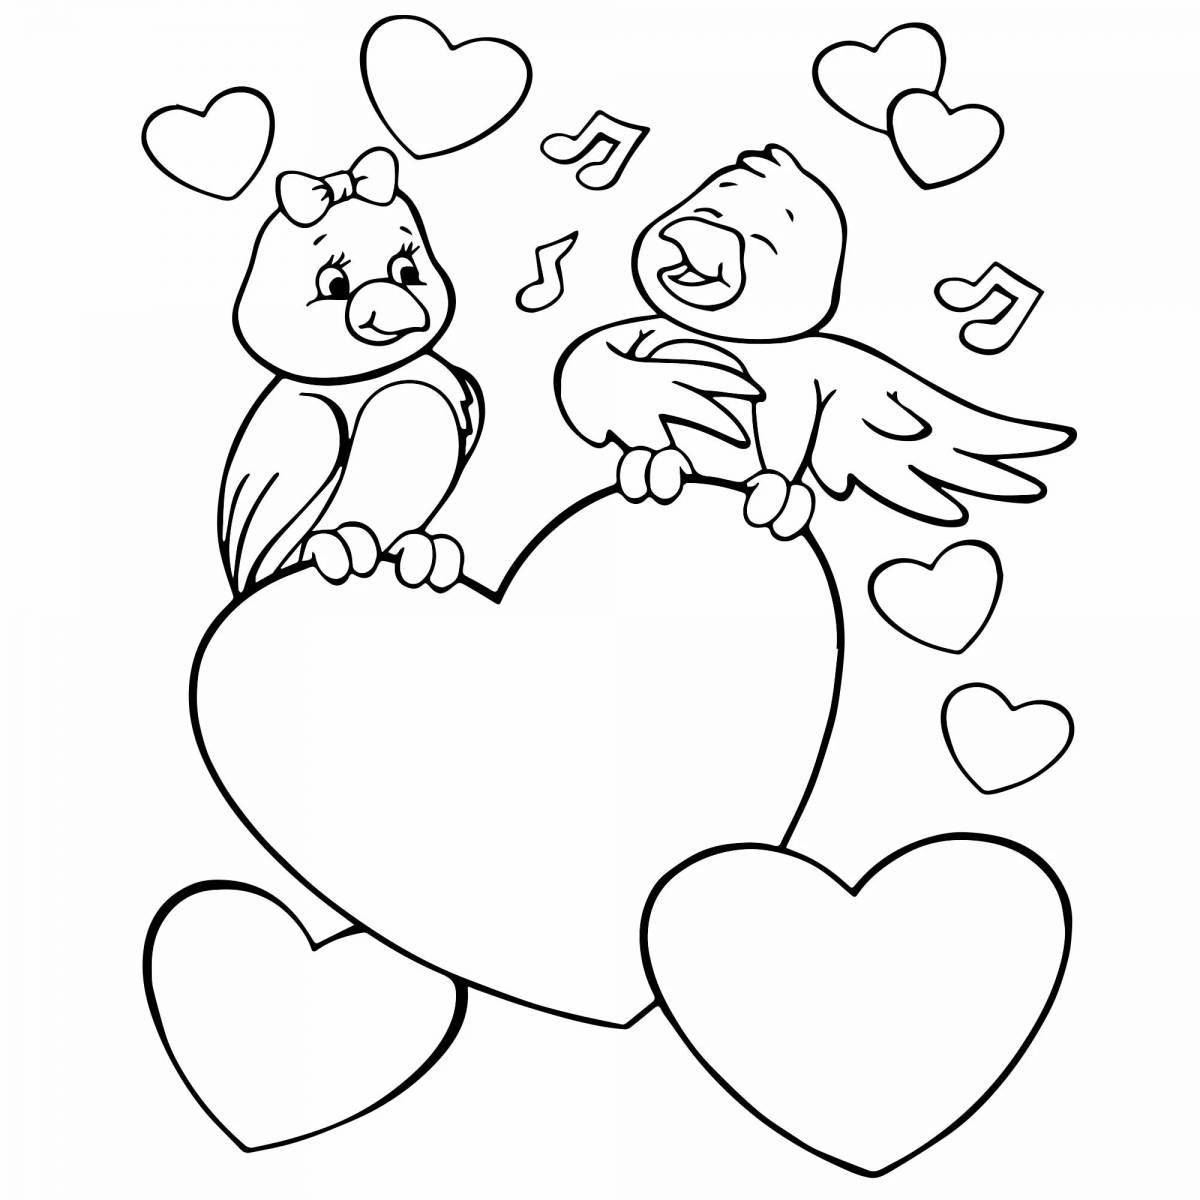 Festive valentine's day coloring book for kids